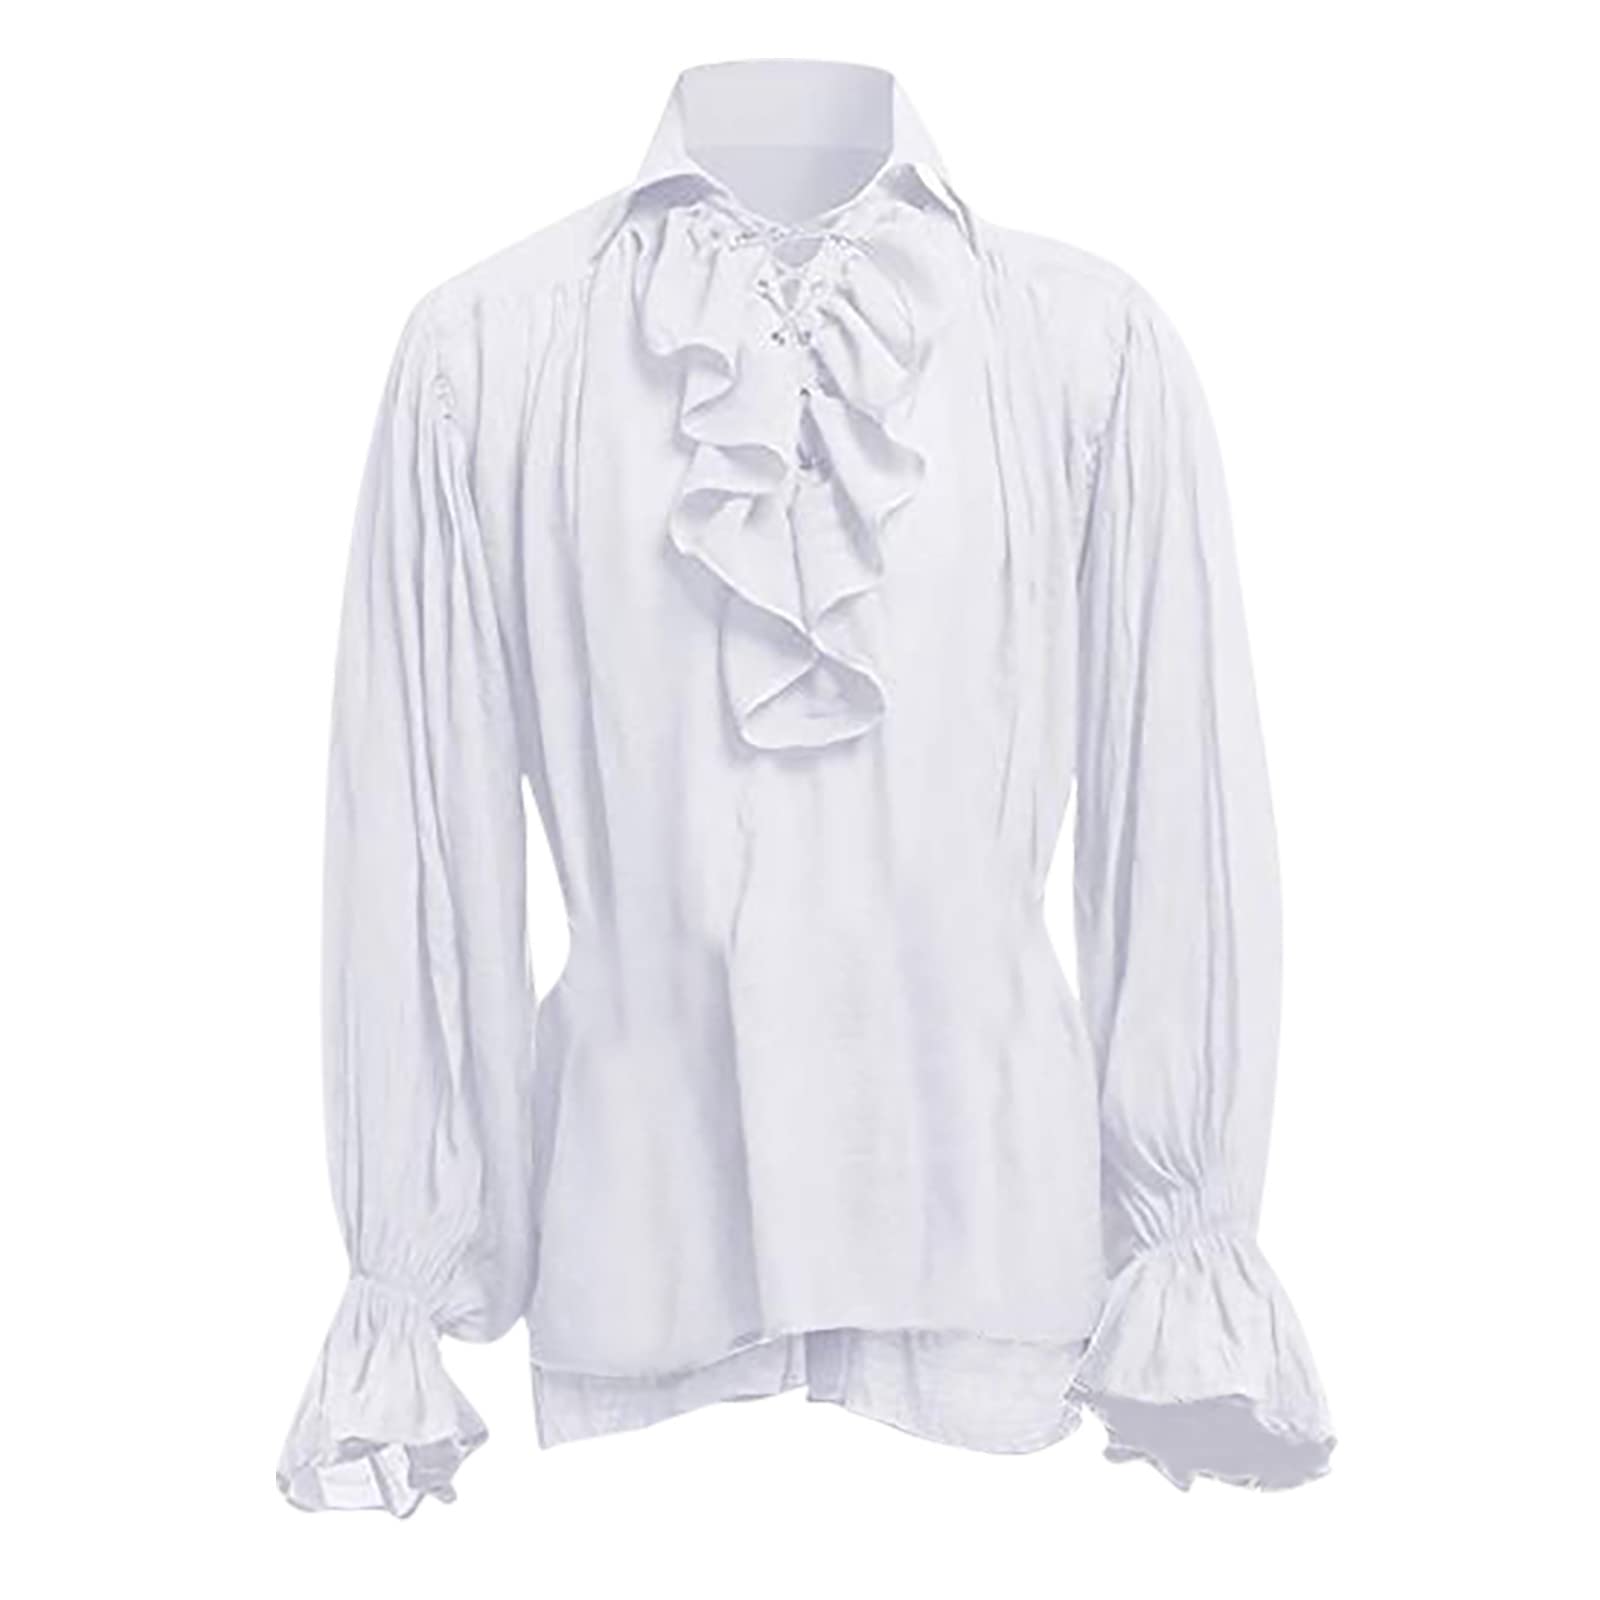 Buy Mens Dress Shirts,Men's Gothic Renaissance Ruffle Front Pirate Shirts  Lace Up Puffy Sleeve Top Solid Long Sleeve